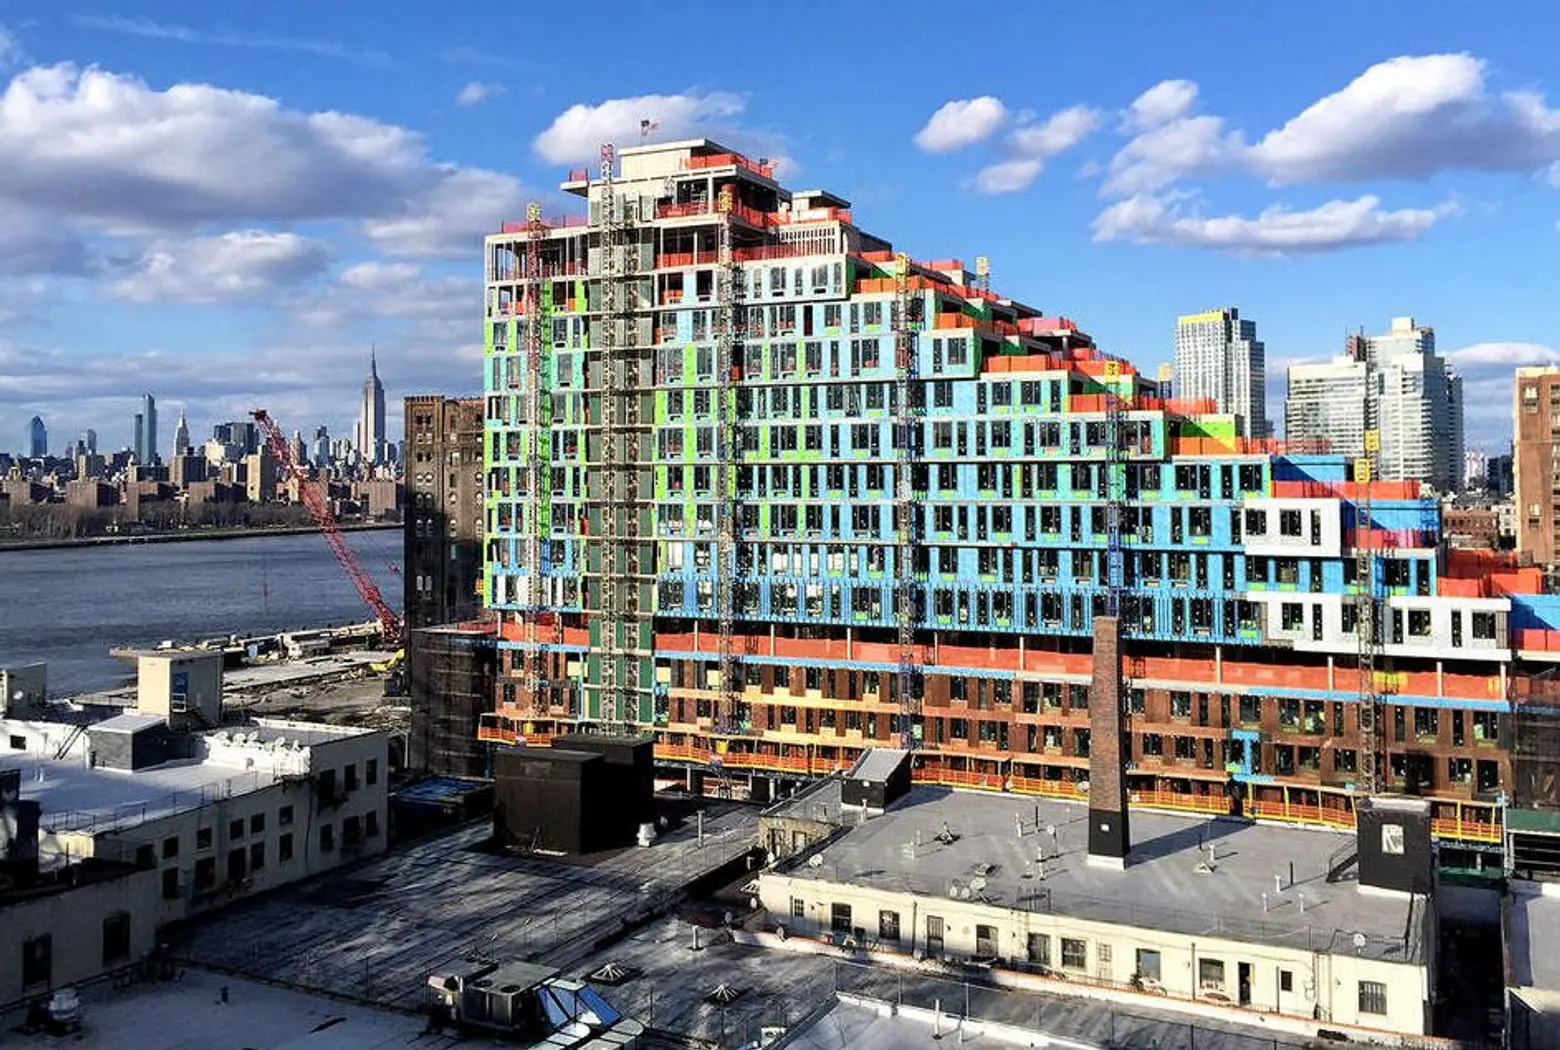 Construction update: Domino Sugar Factory tower tops off and gets its skybridge